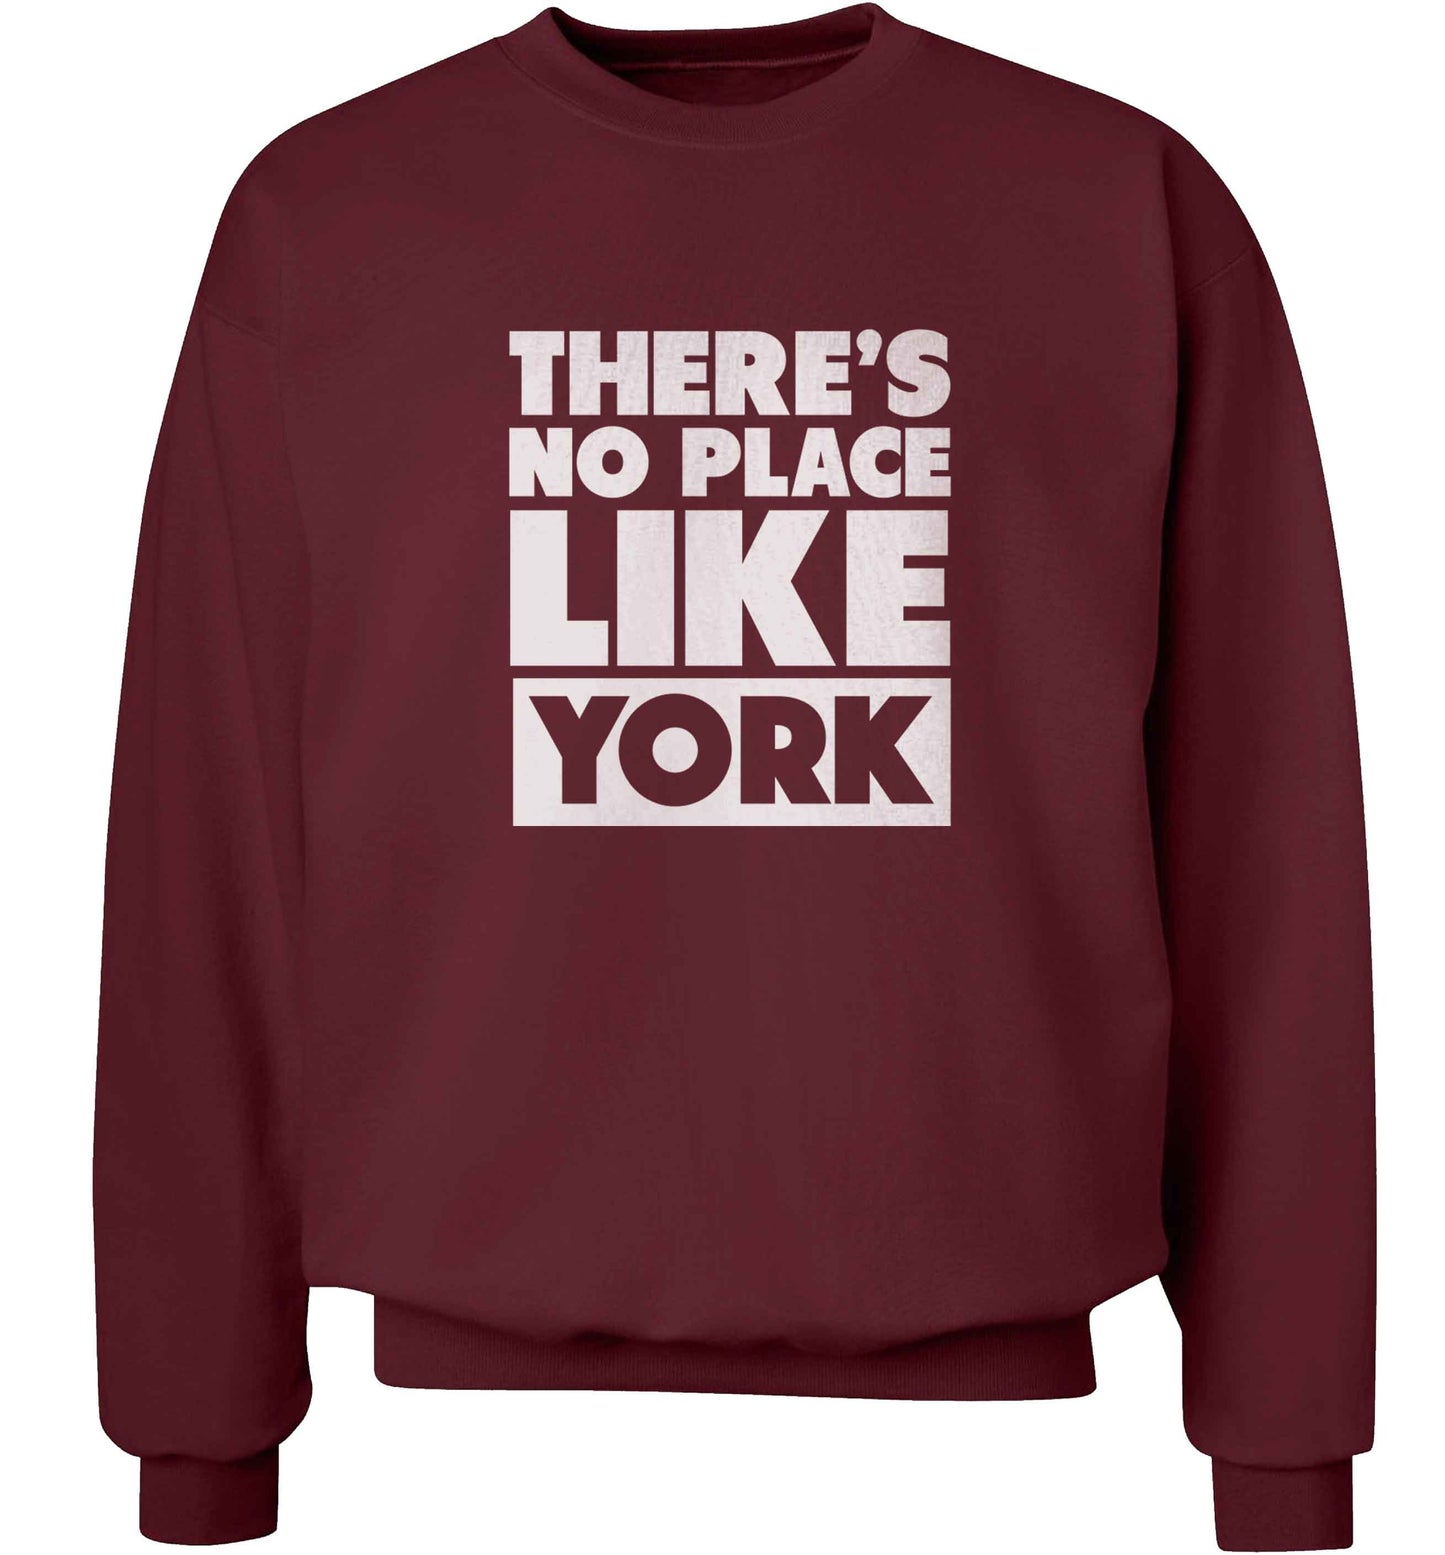 There's no place like york adult's unisex maroon sweater 2XL